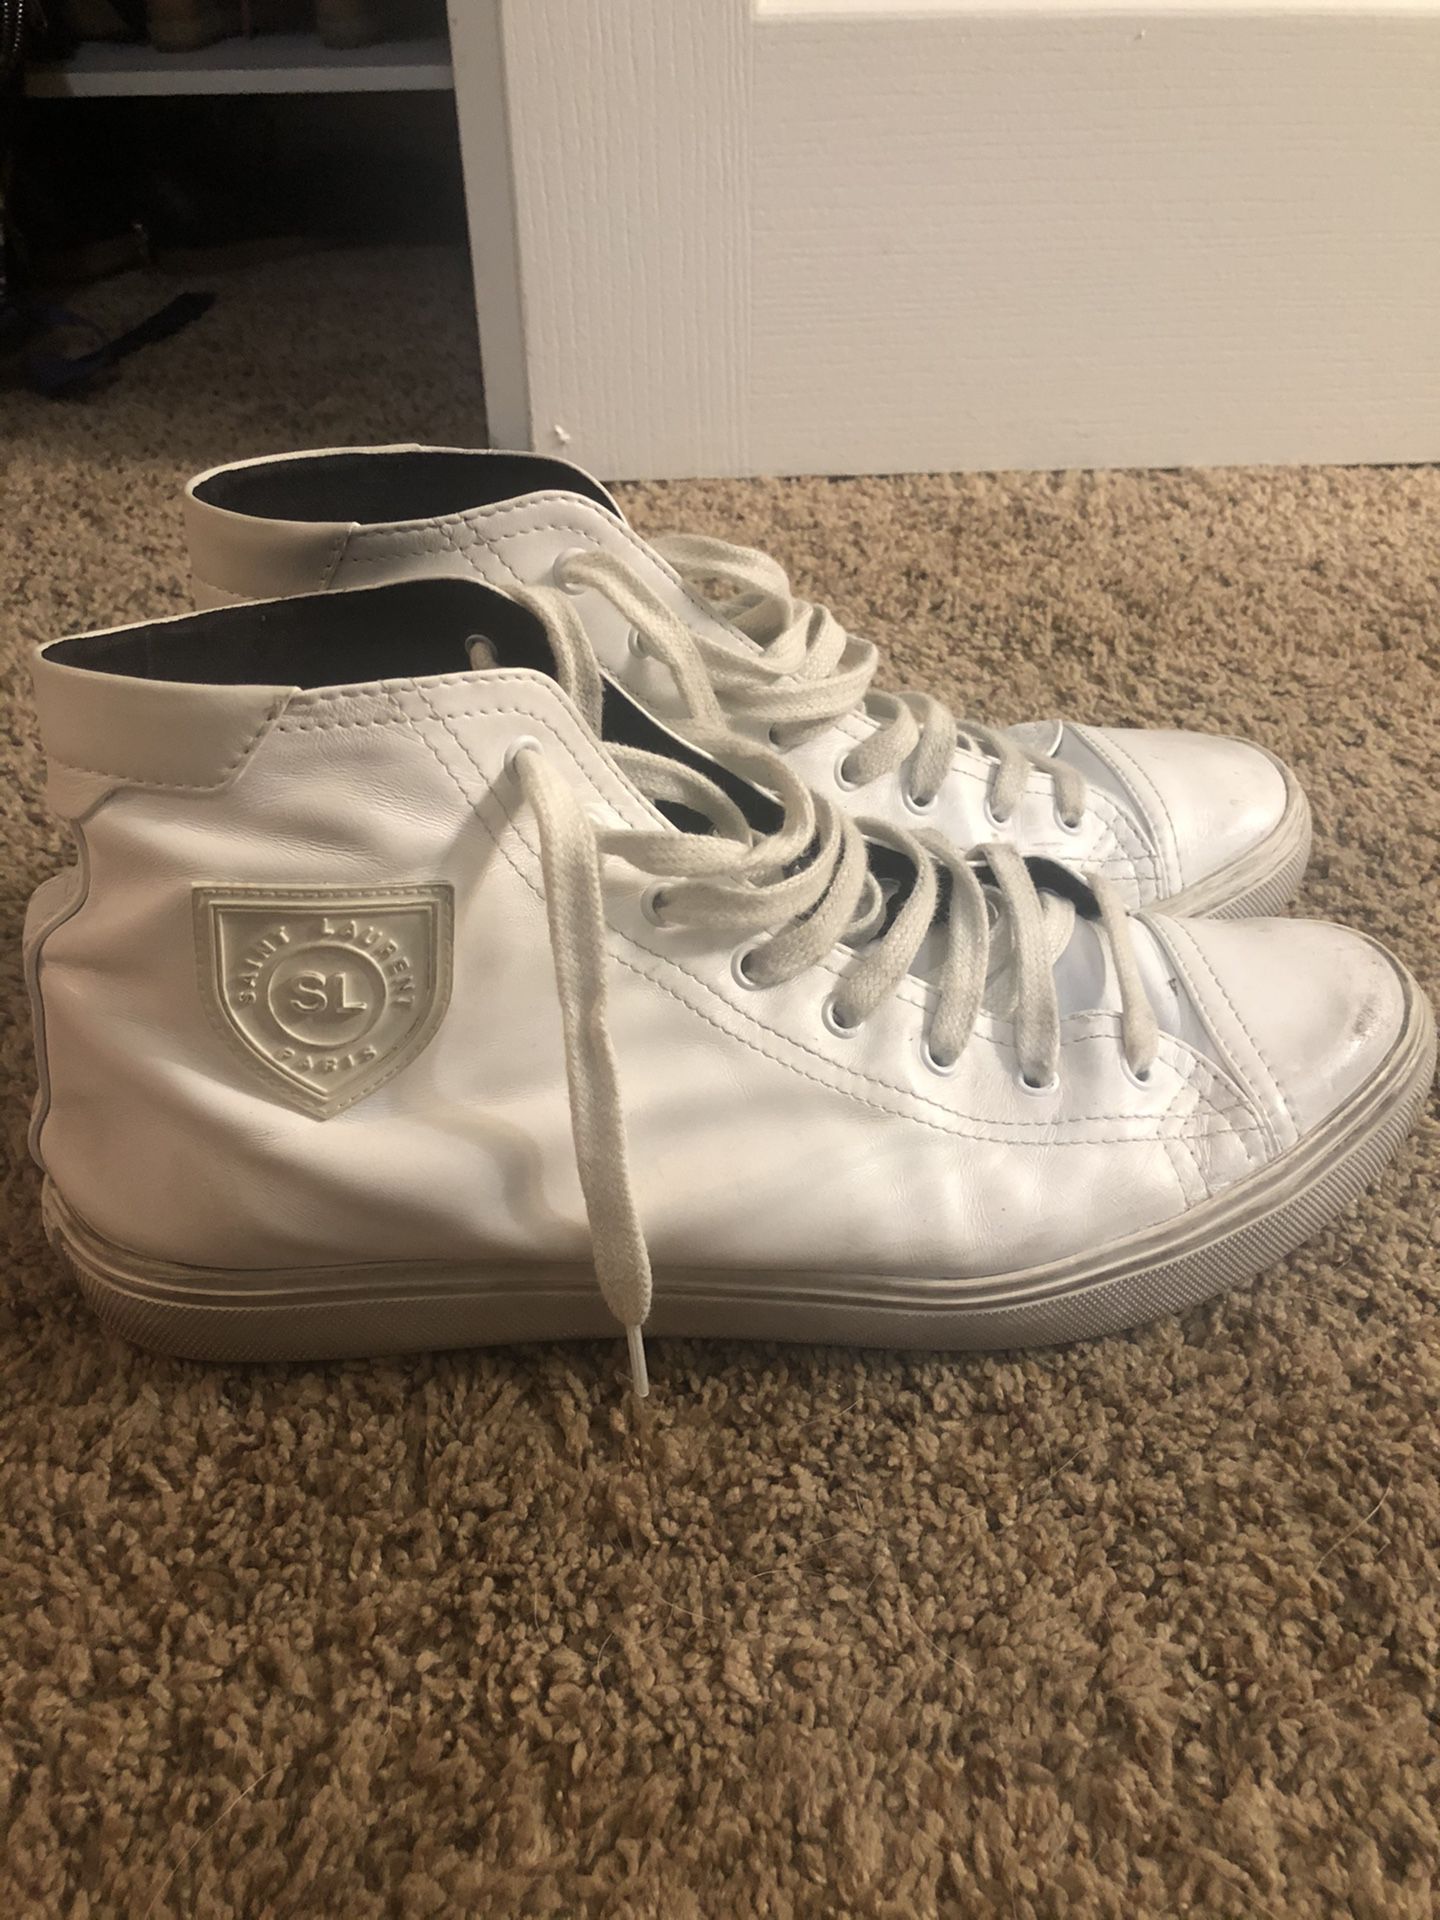 Saint Laurent high top “used leather” shoes size 11